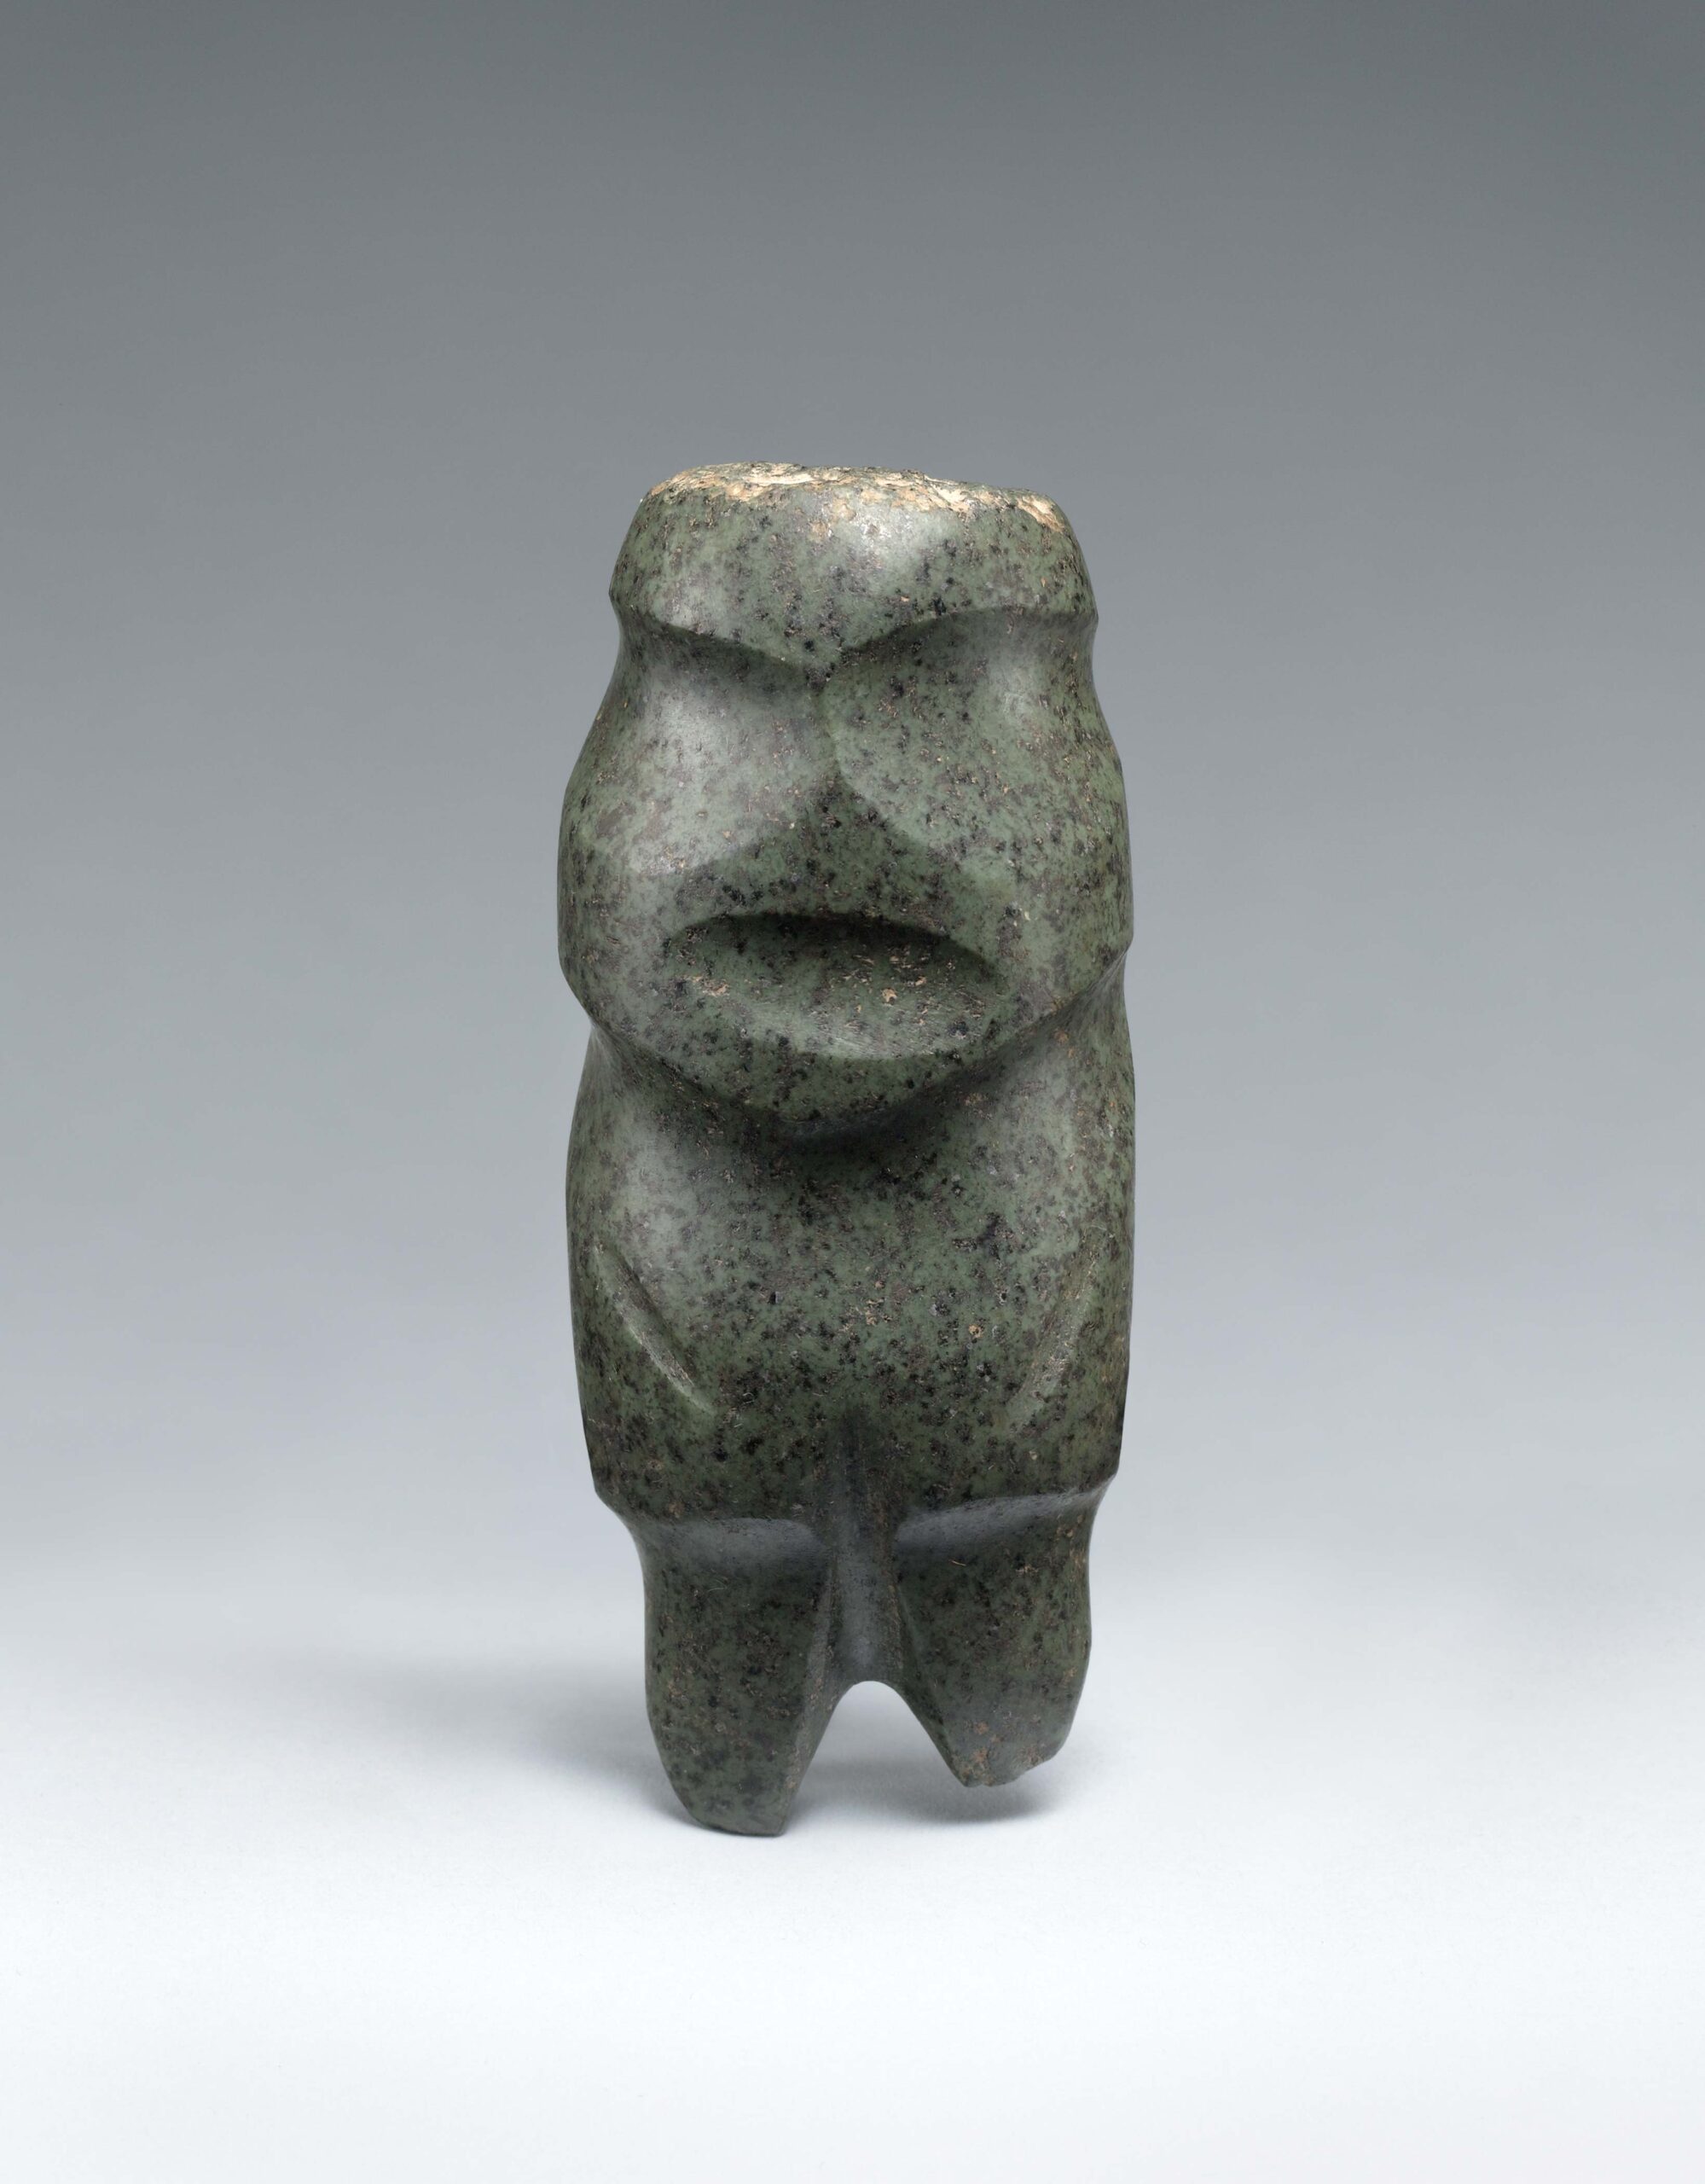 Abstract stone sculpture of a standing figure with indentations indicating facial features and arms at torso.